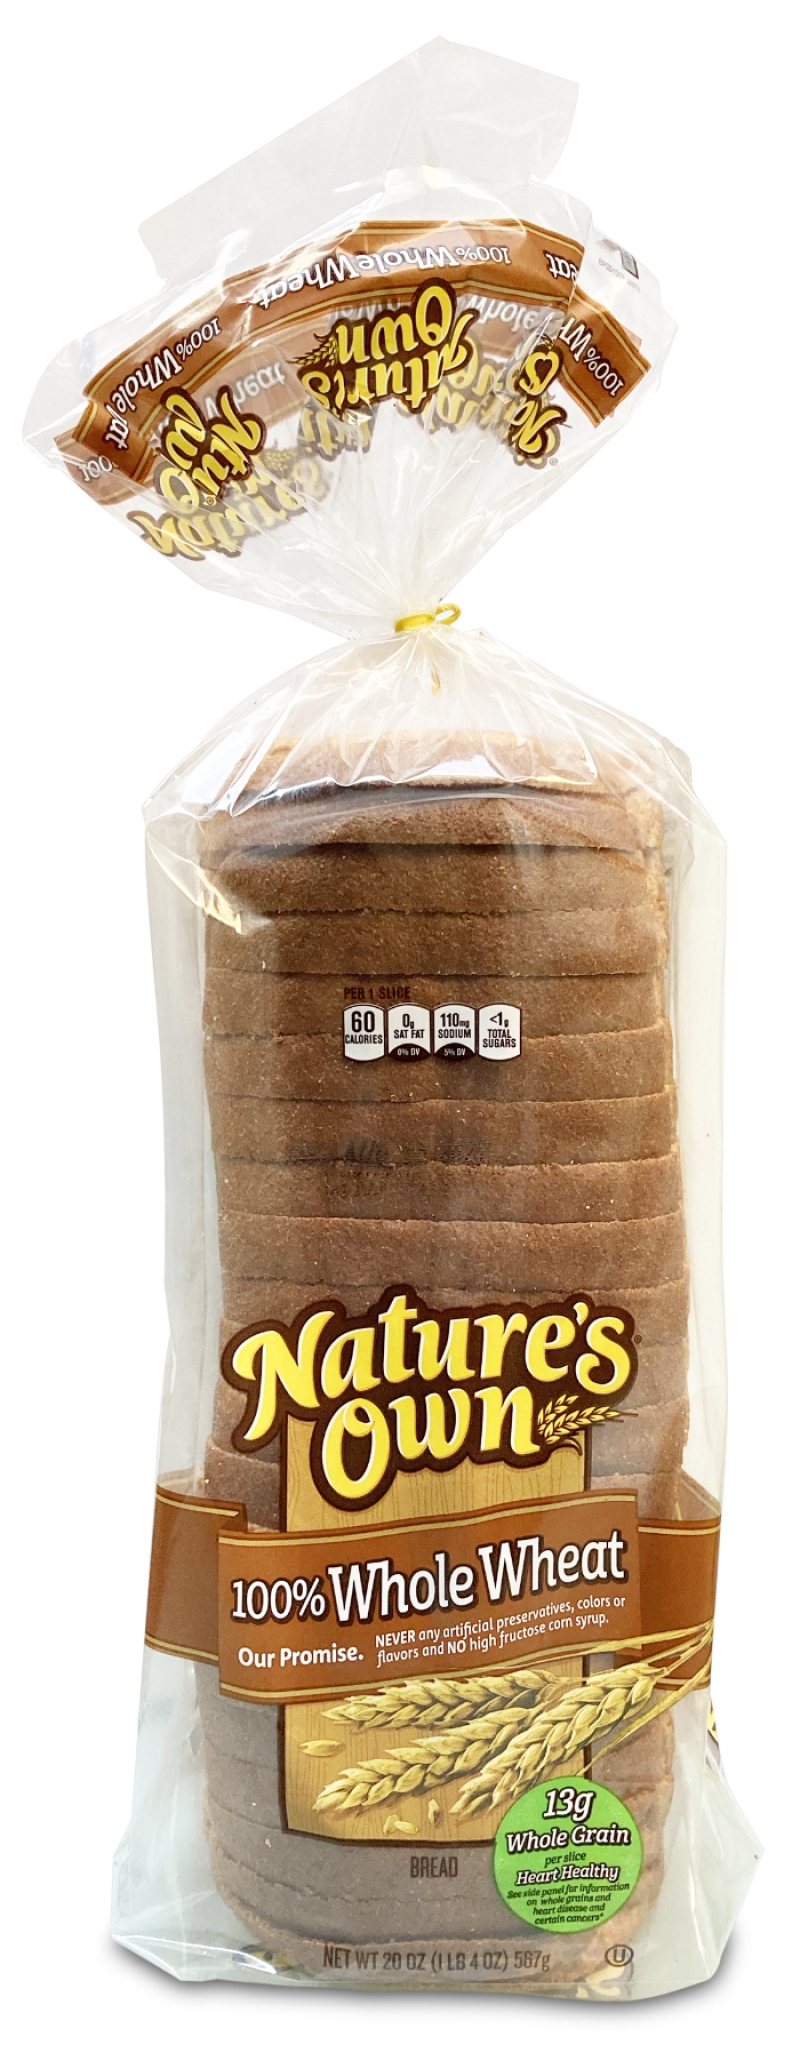 nature's own whole wheat bread